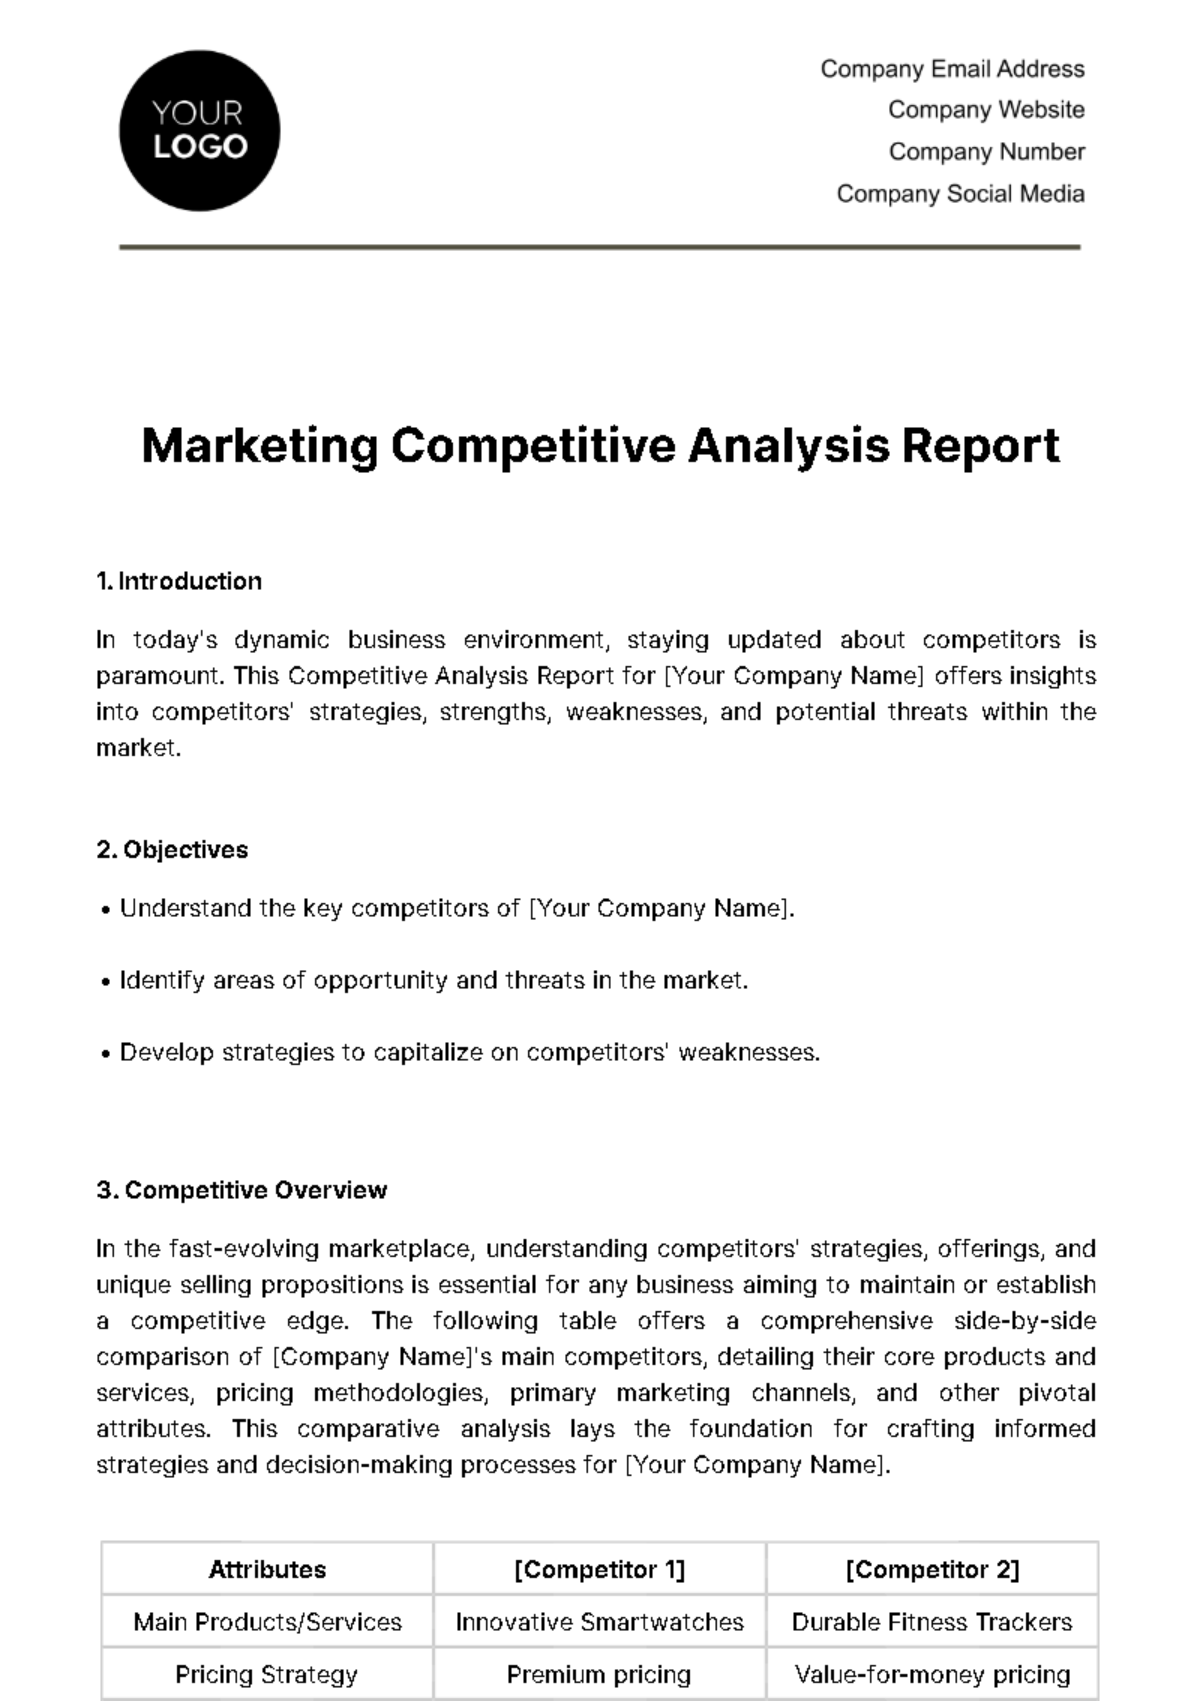 Marketing Competitive Analysis Report Template